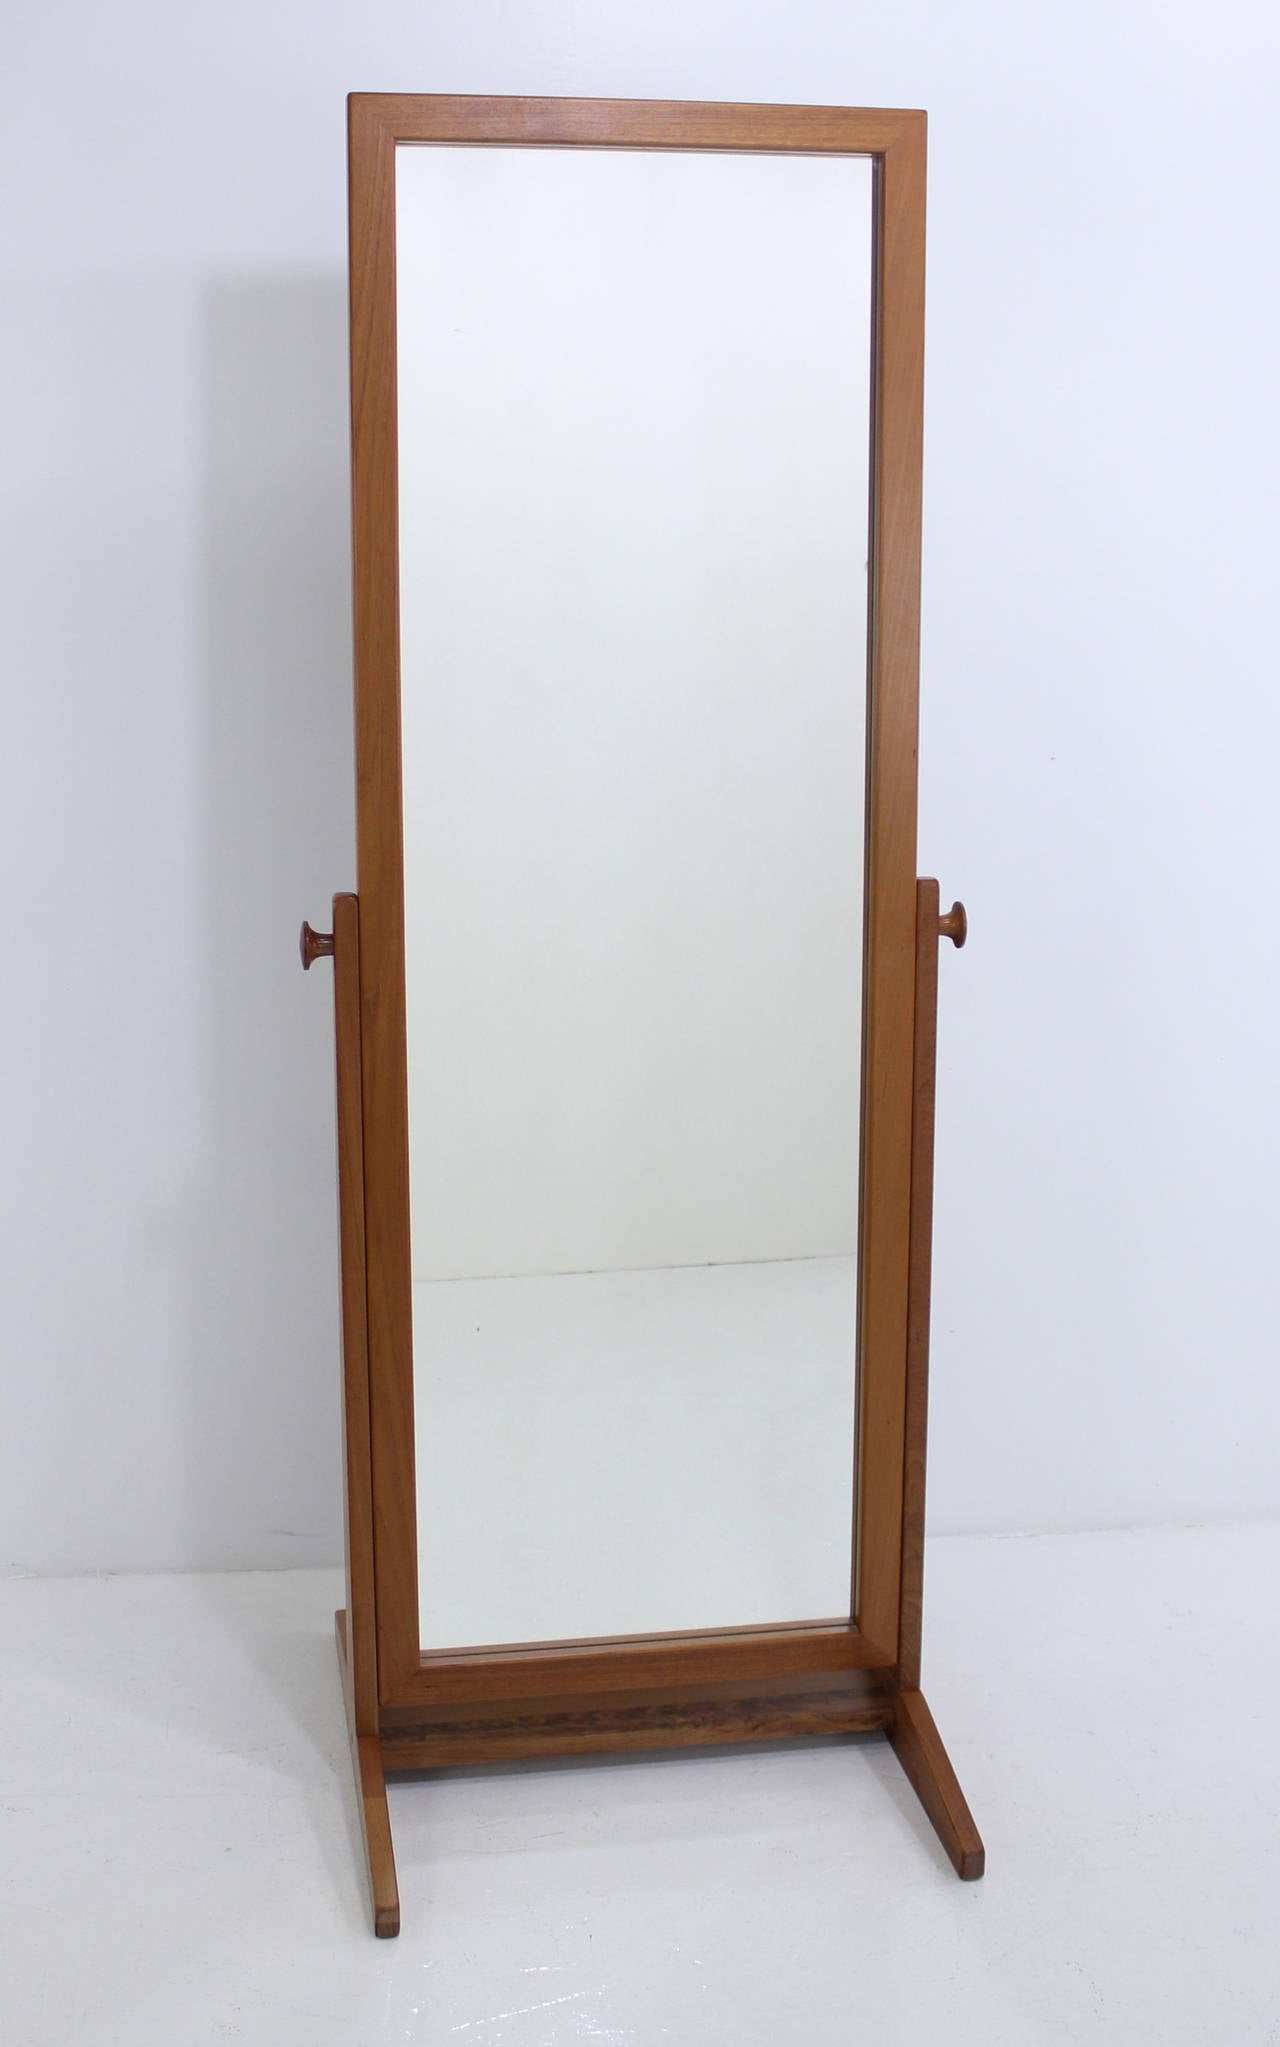 Danish modern full length mirror designed by Pederson & Hansen.
Teak frame and stand.
Side knobs adjust mirror angle.
Professionally restored and refinished by LookModern.
Matchless quality and price.
Low freight and quick ship.